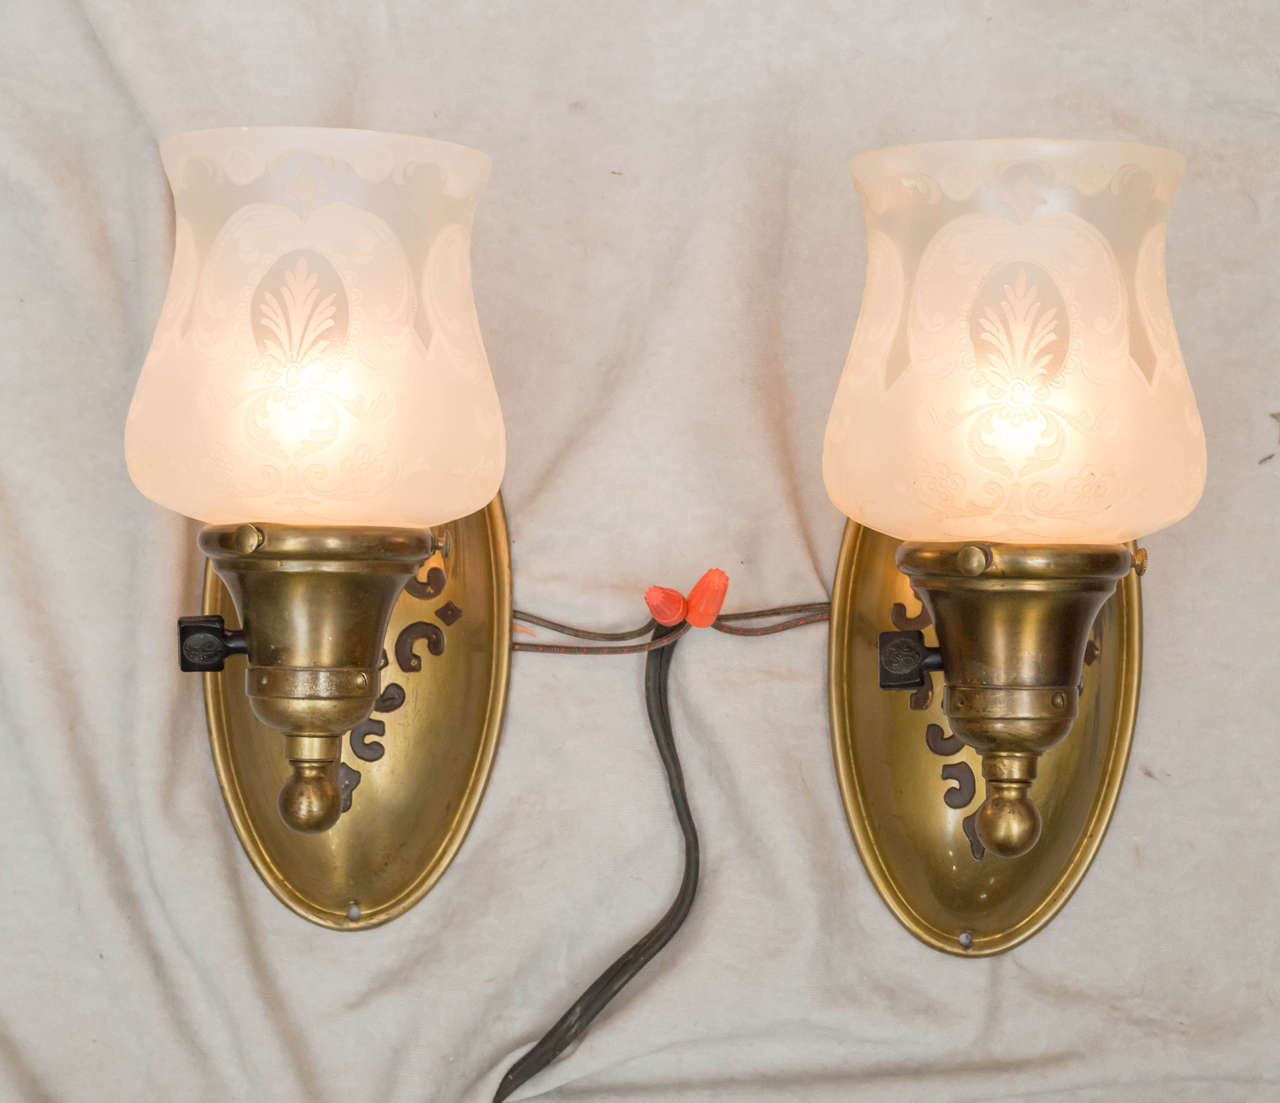 These are a nice elegant pair of smaller sconces that could work in many different settings. The gilt bronze finish is original, and does have some wear areas that we felt were not so distracting as to redo all the metal work. These are antiques,